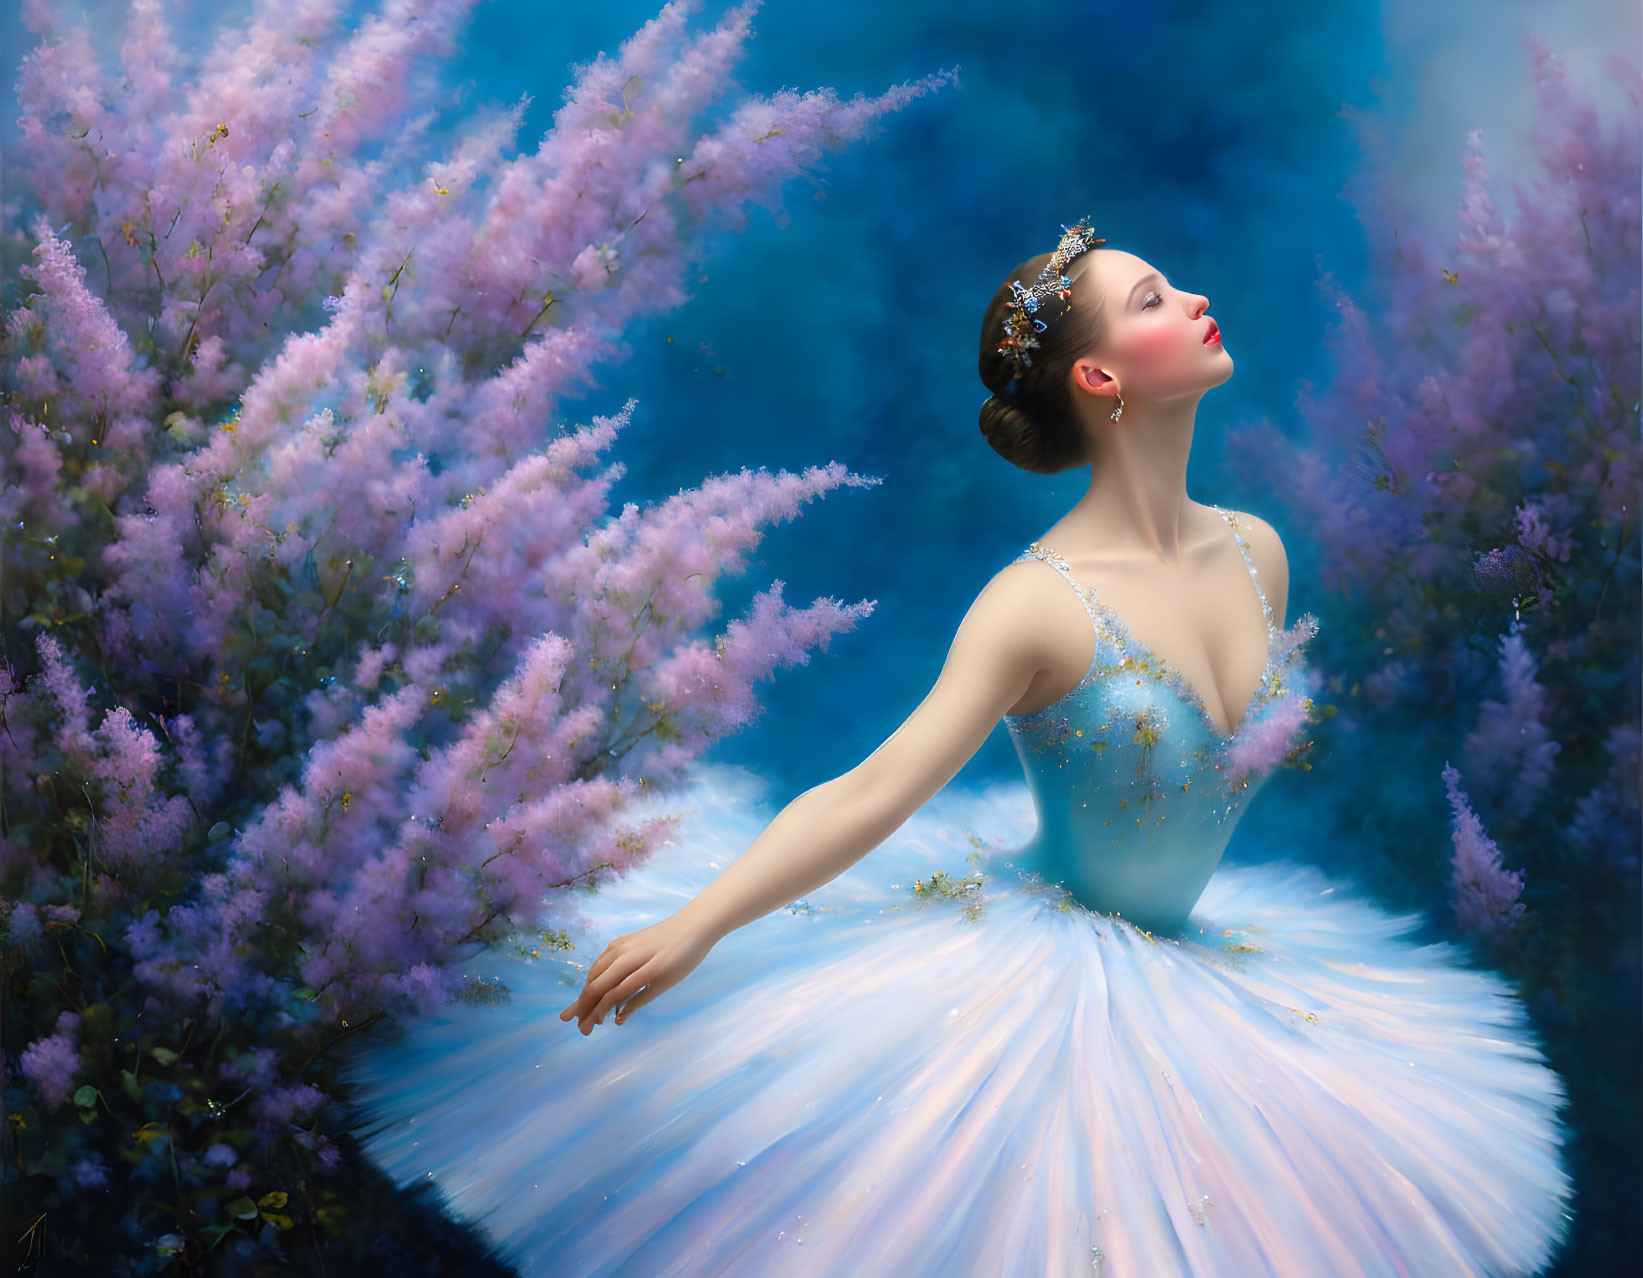 Ballerina in white tutu among pink blooms and blue backdrop